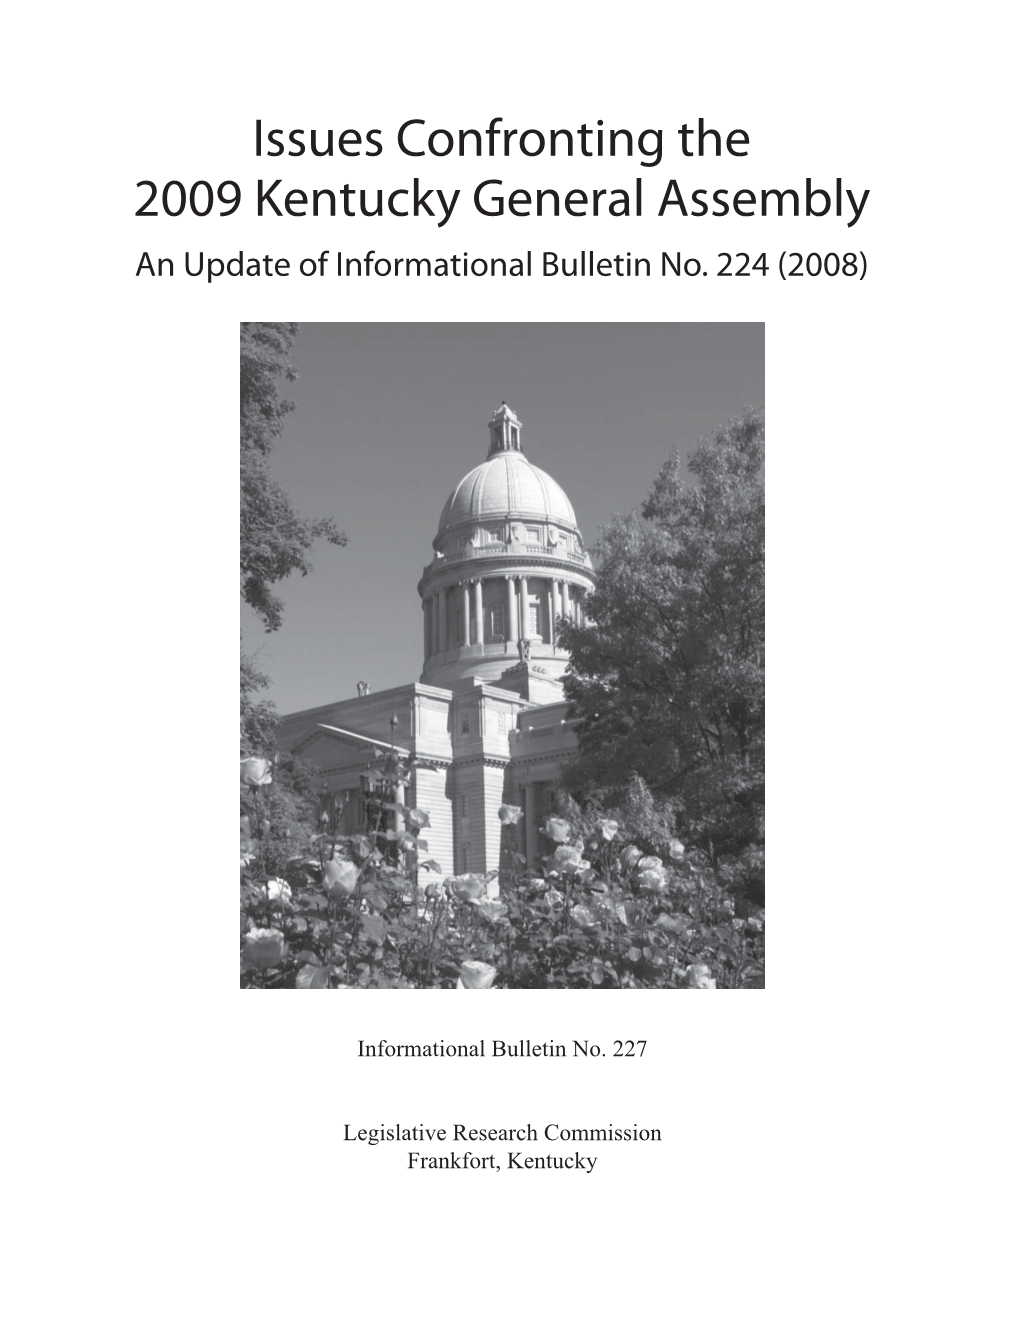 Issues Confronting the 2009 Kentucky General Assembly an Update of Informational Bulletin No